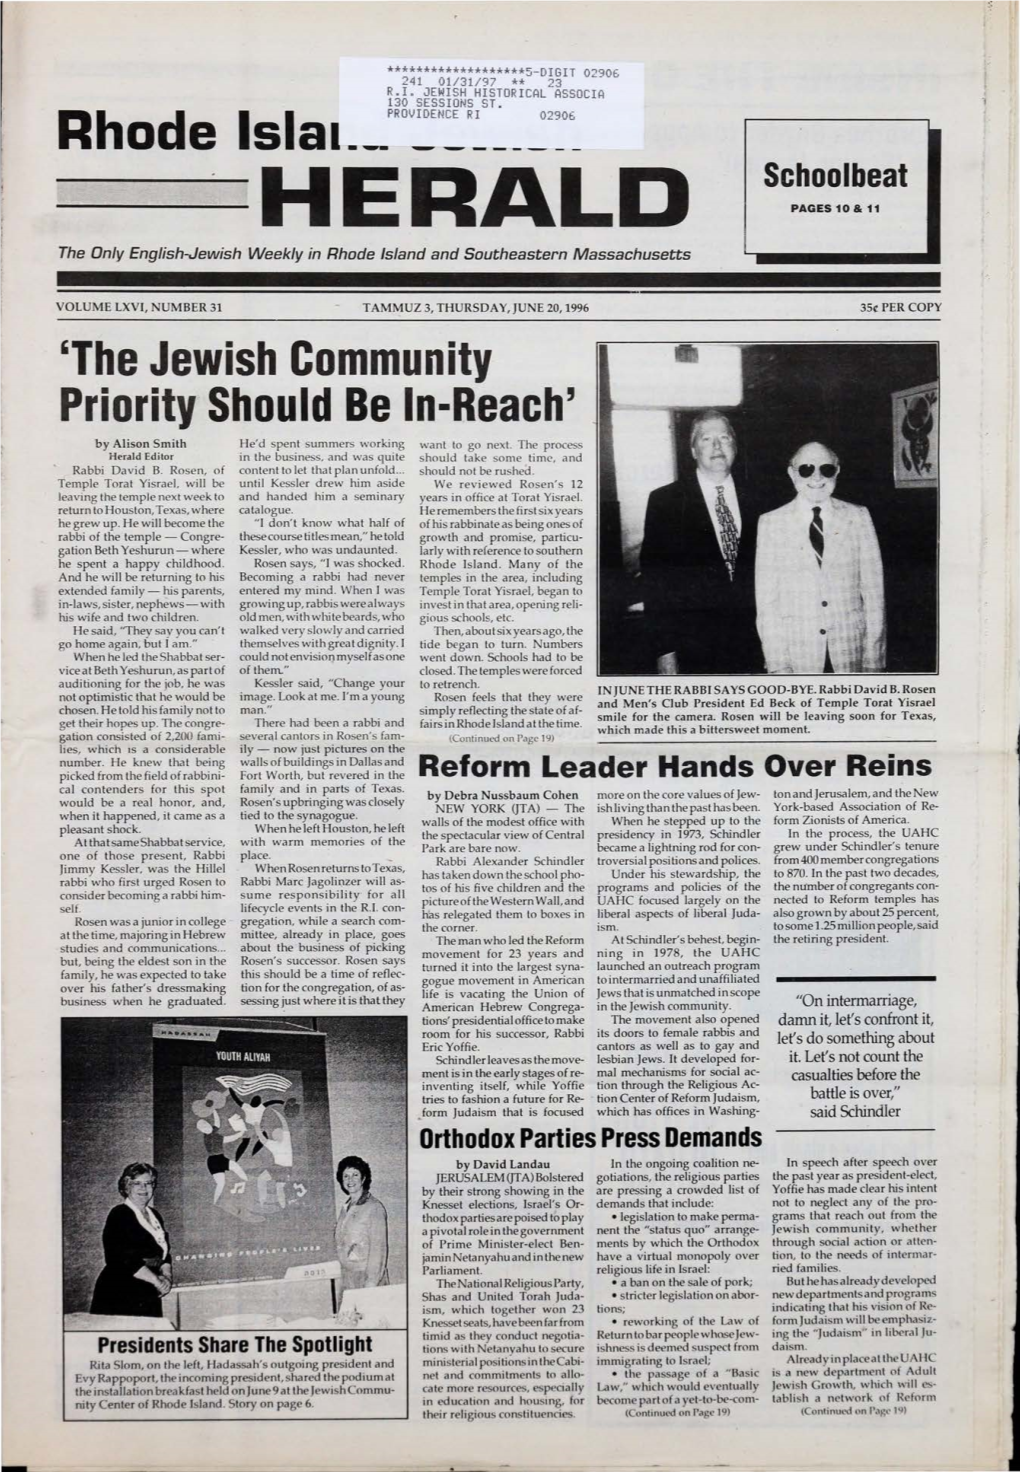 HERALD PAGES 10 & 11 the Only English-Jewish Weekly in Rhode Island and Southeastern Massachusetts